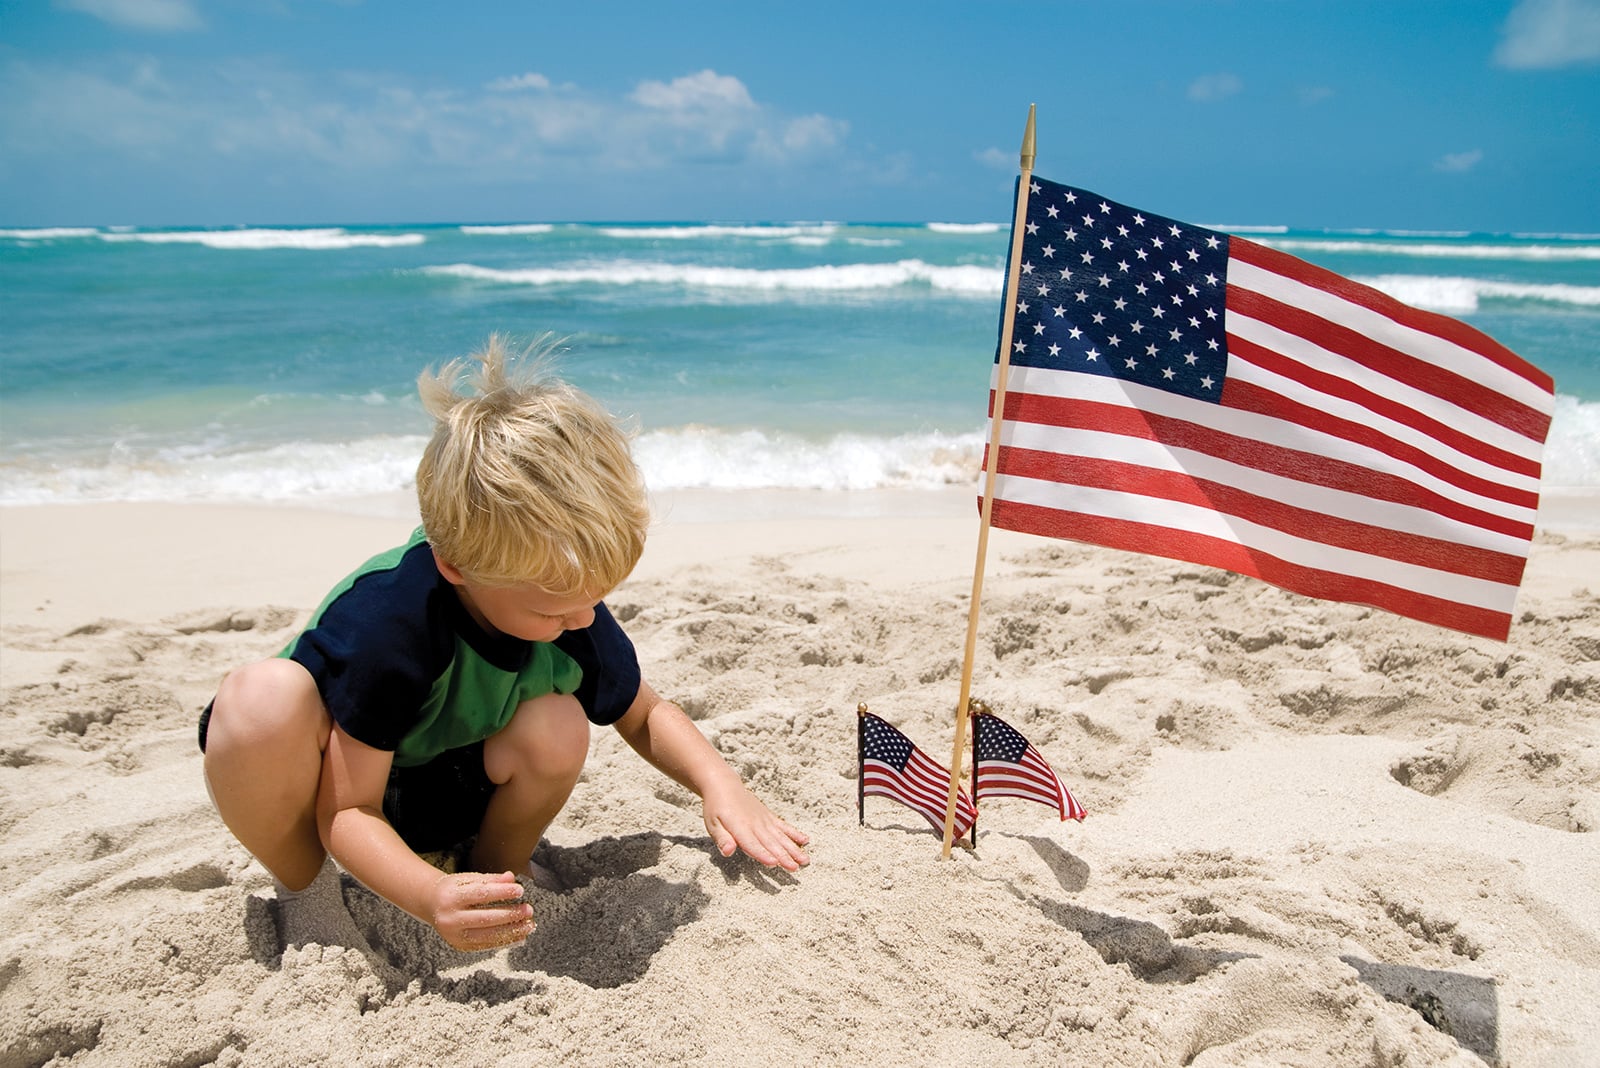 Child playing in sand with American flags